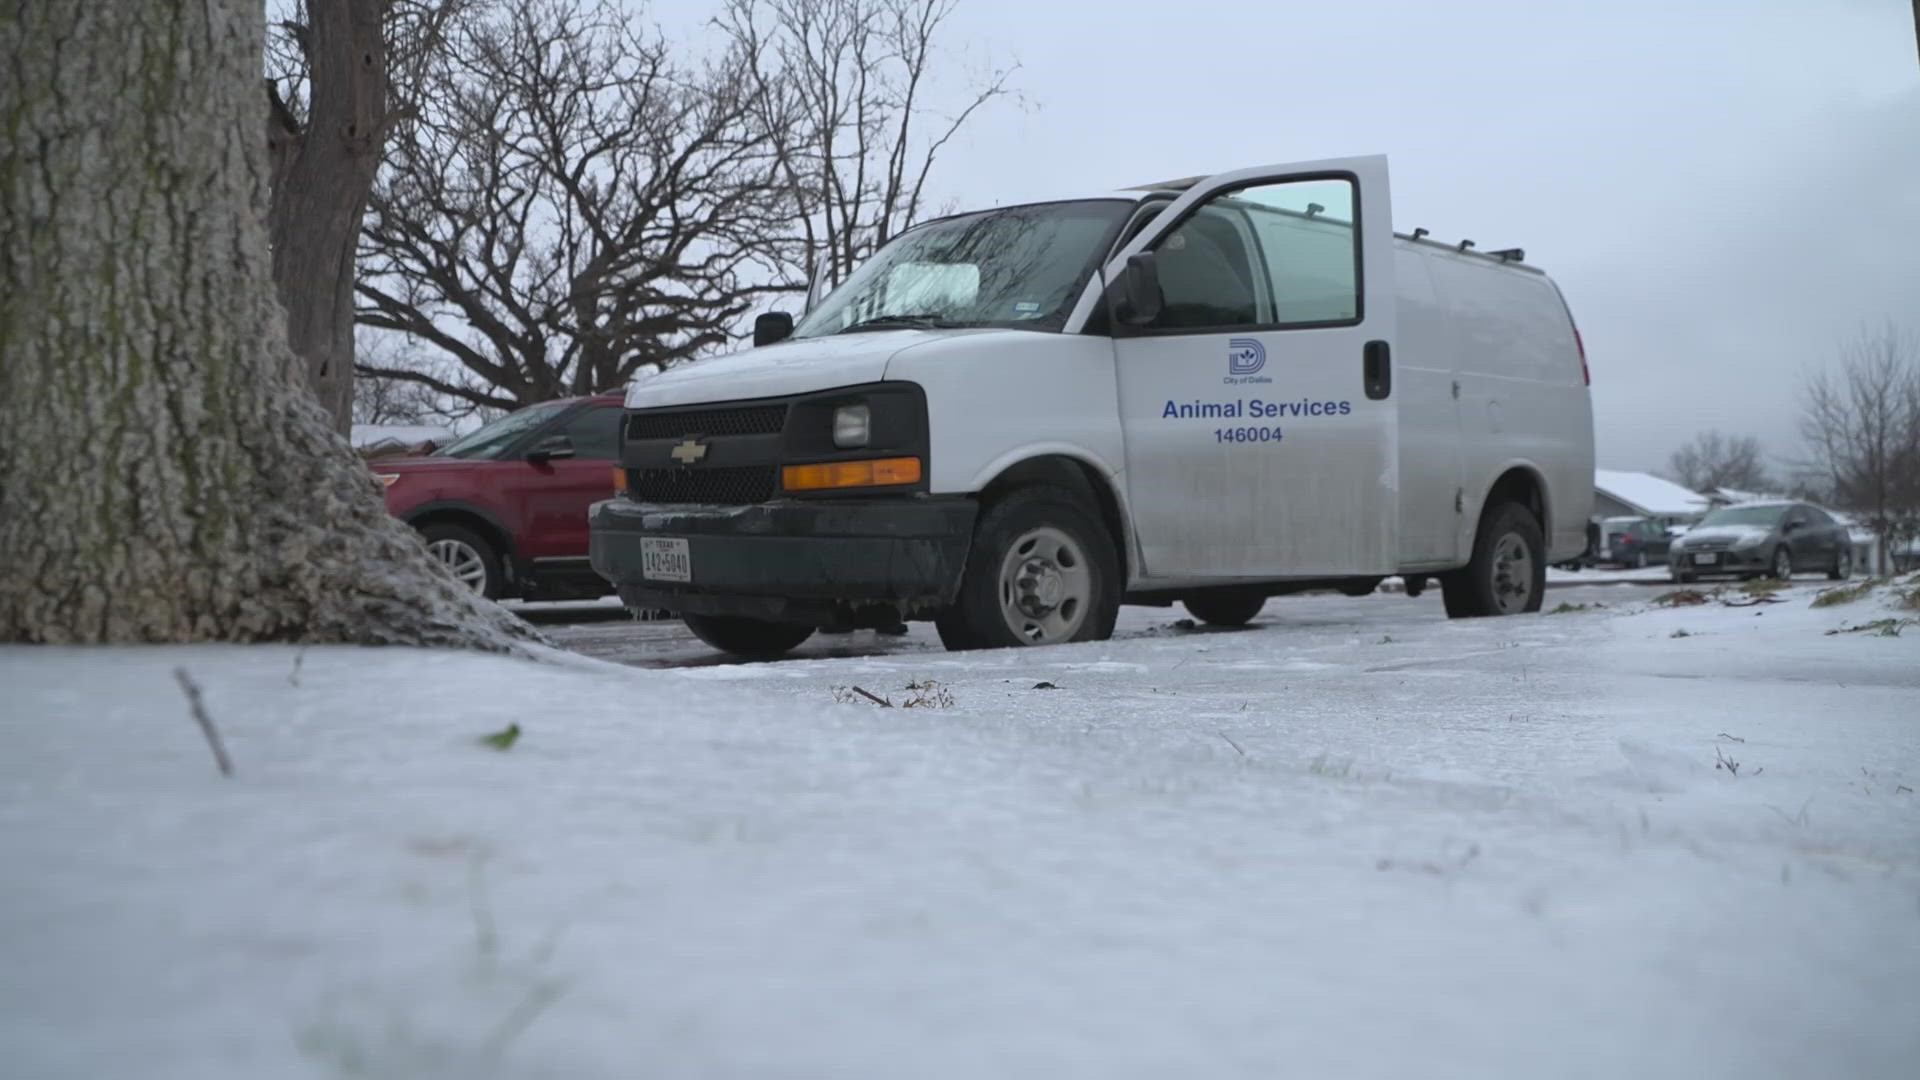 WFAA tagged along with Dallas Animal Services as they responded to calls about pets in the cold